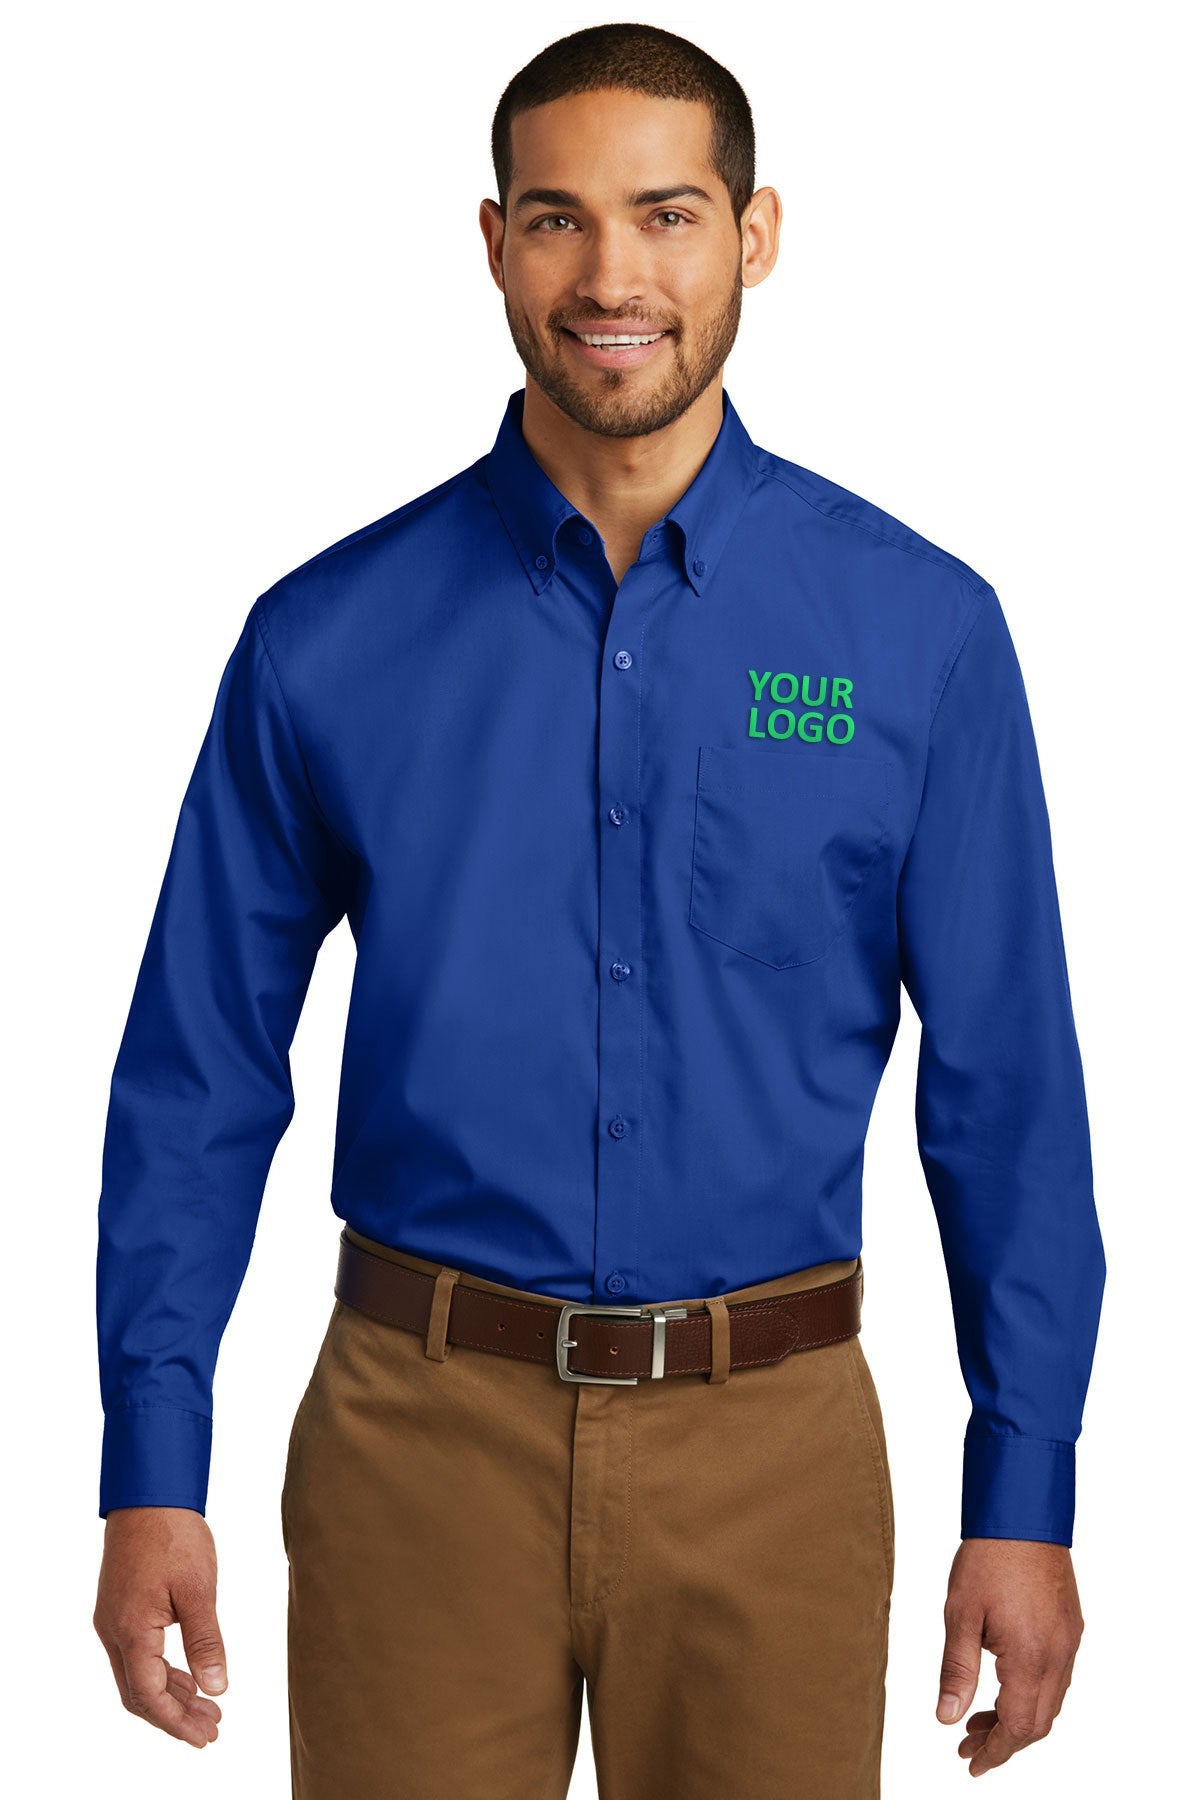 Port Authority True Royal TW100 business shirts with company logo